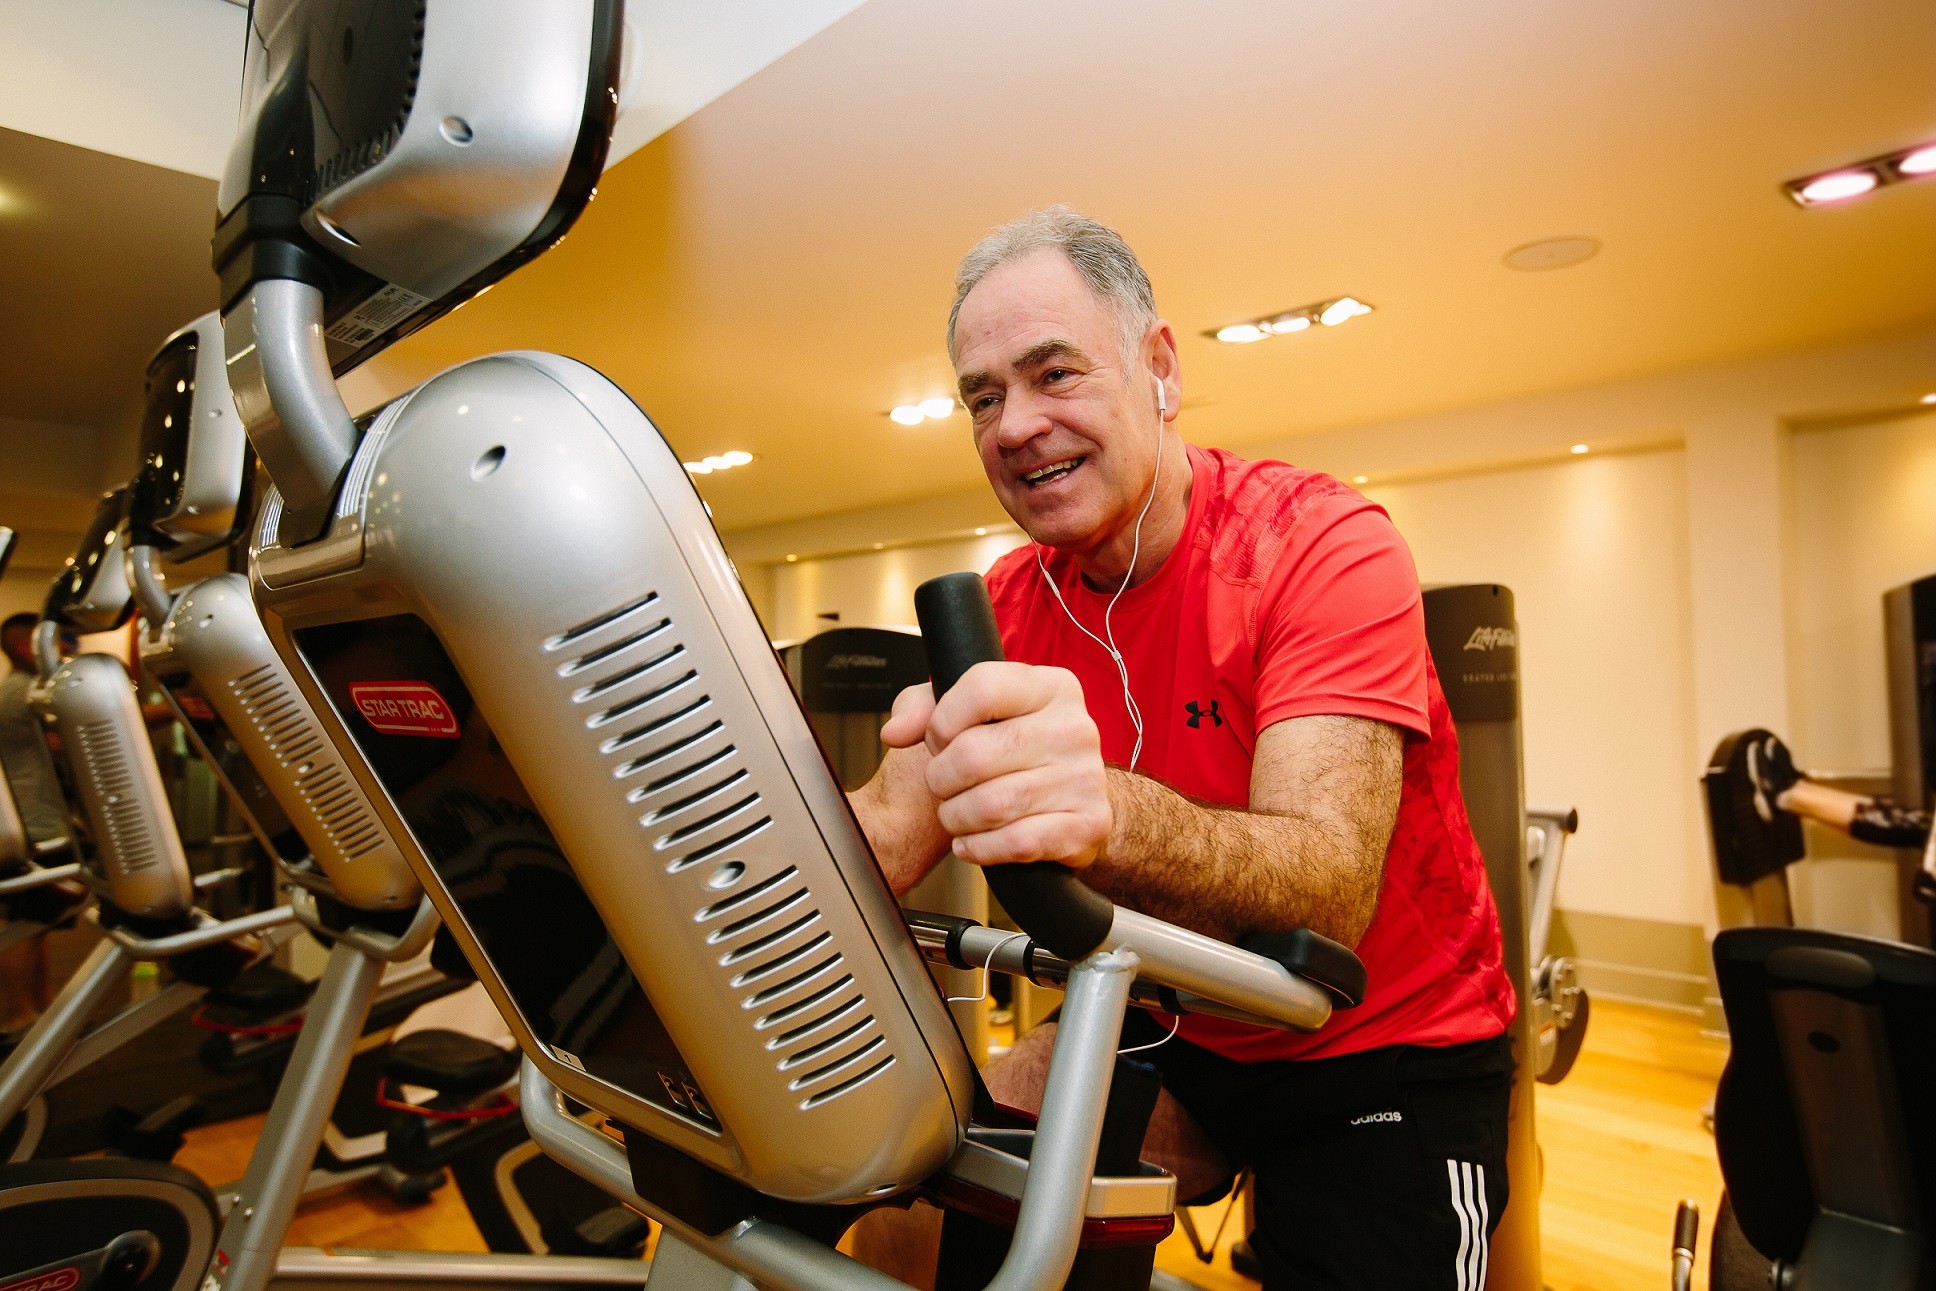 Leisure Centre Newbies Offered Free Fitness Pass